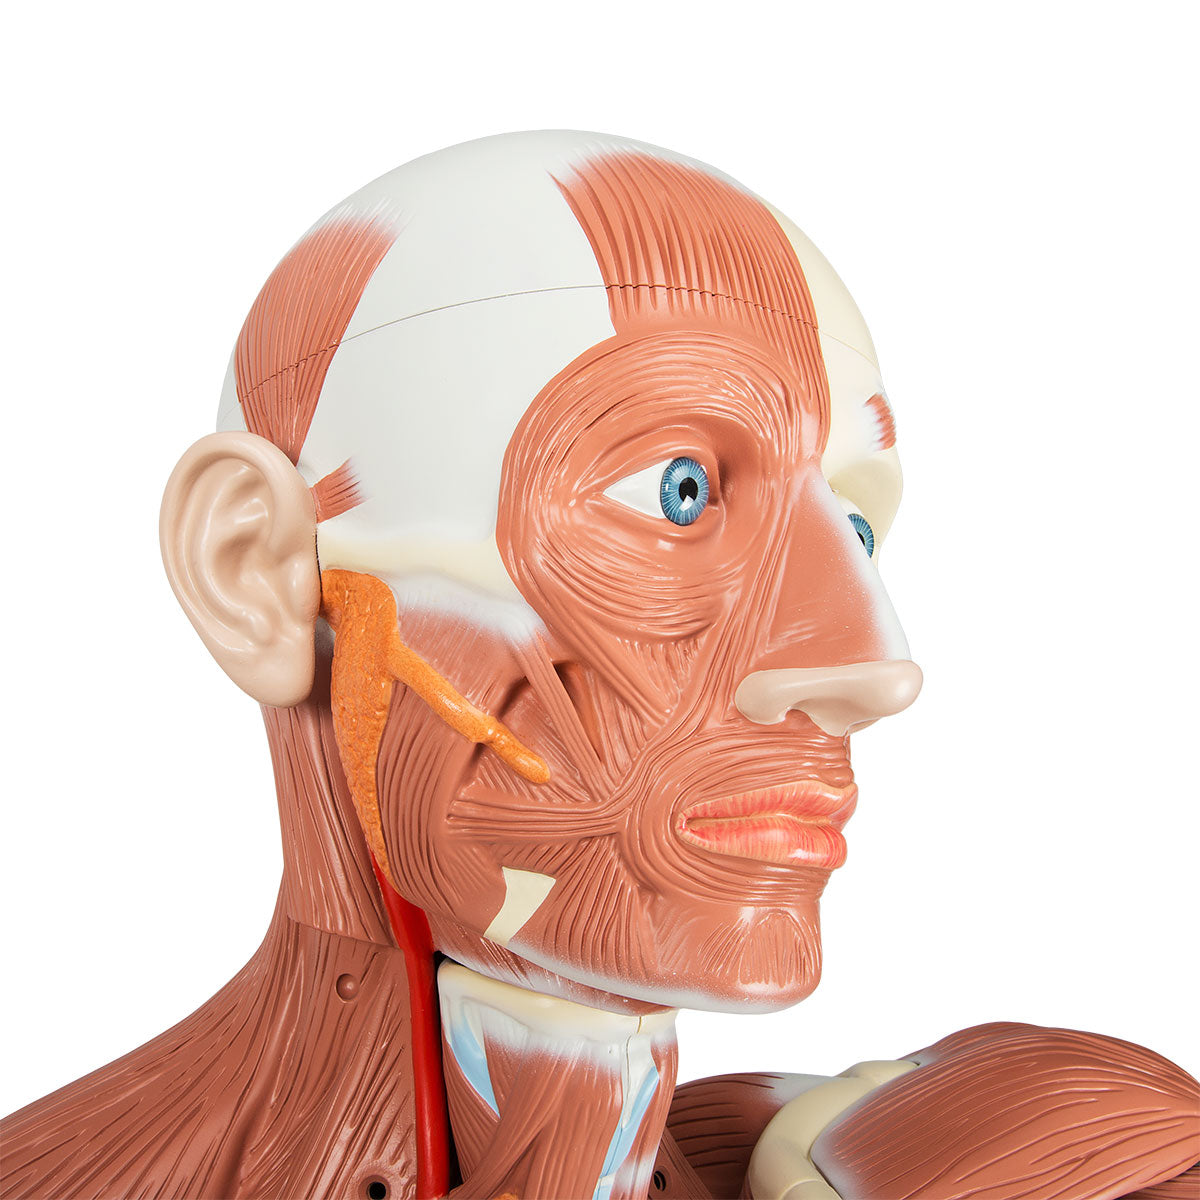 Complete muscle and torso model of 180 cm which can be separated into 37 parts